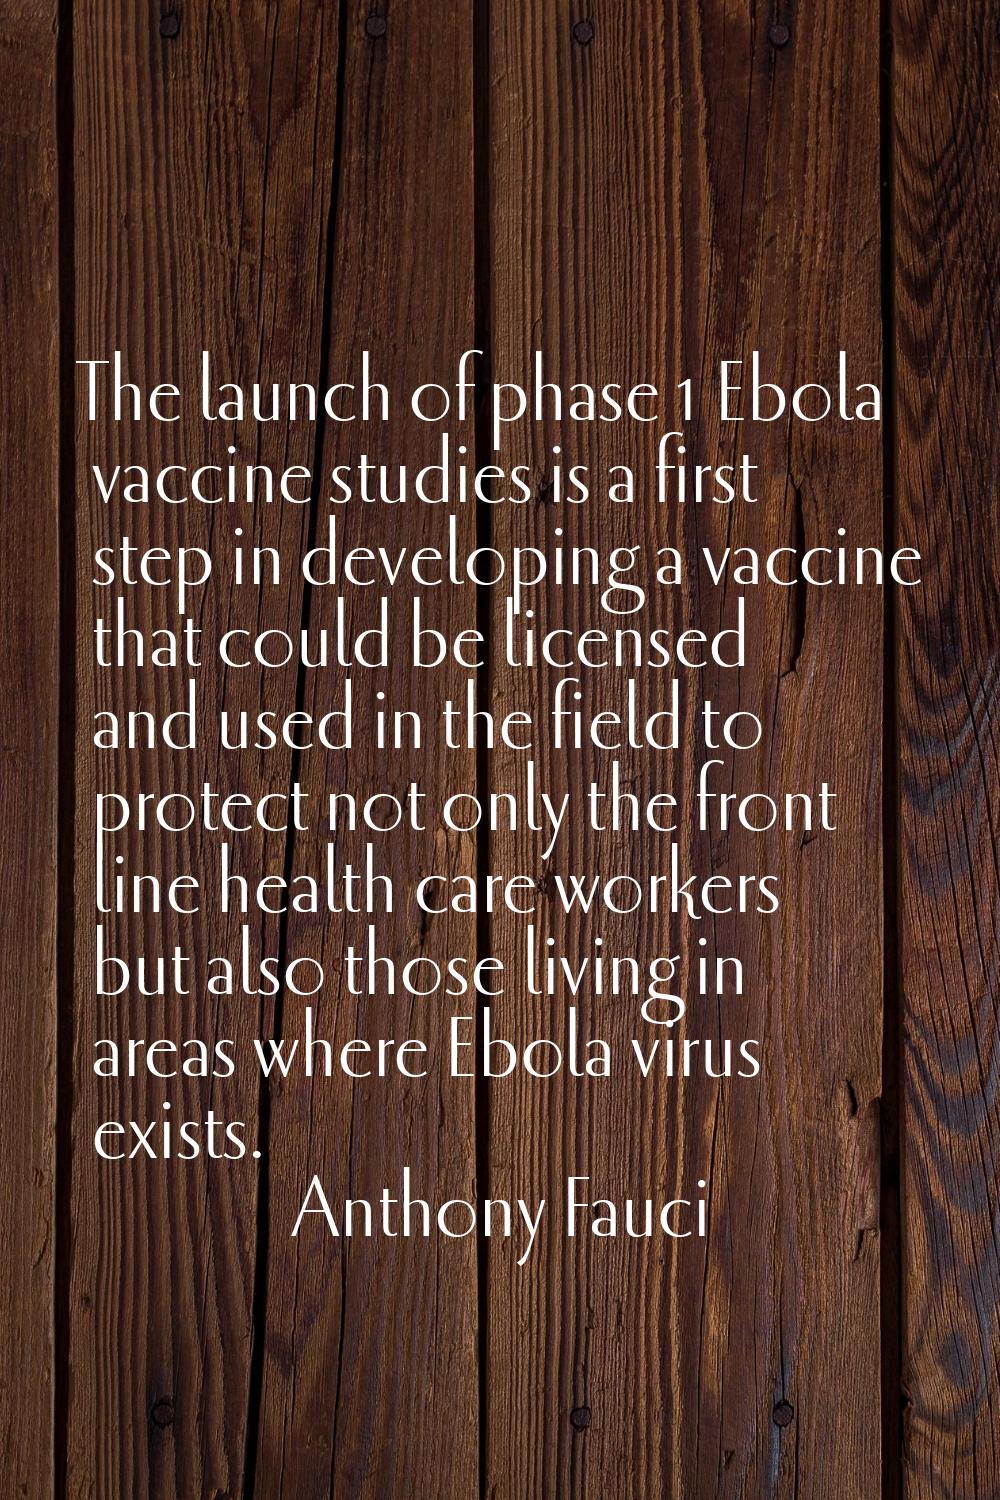 The launch of phase 1 Ebola vaccine studies is a first step in developing a vaccine that could be l